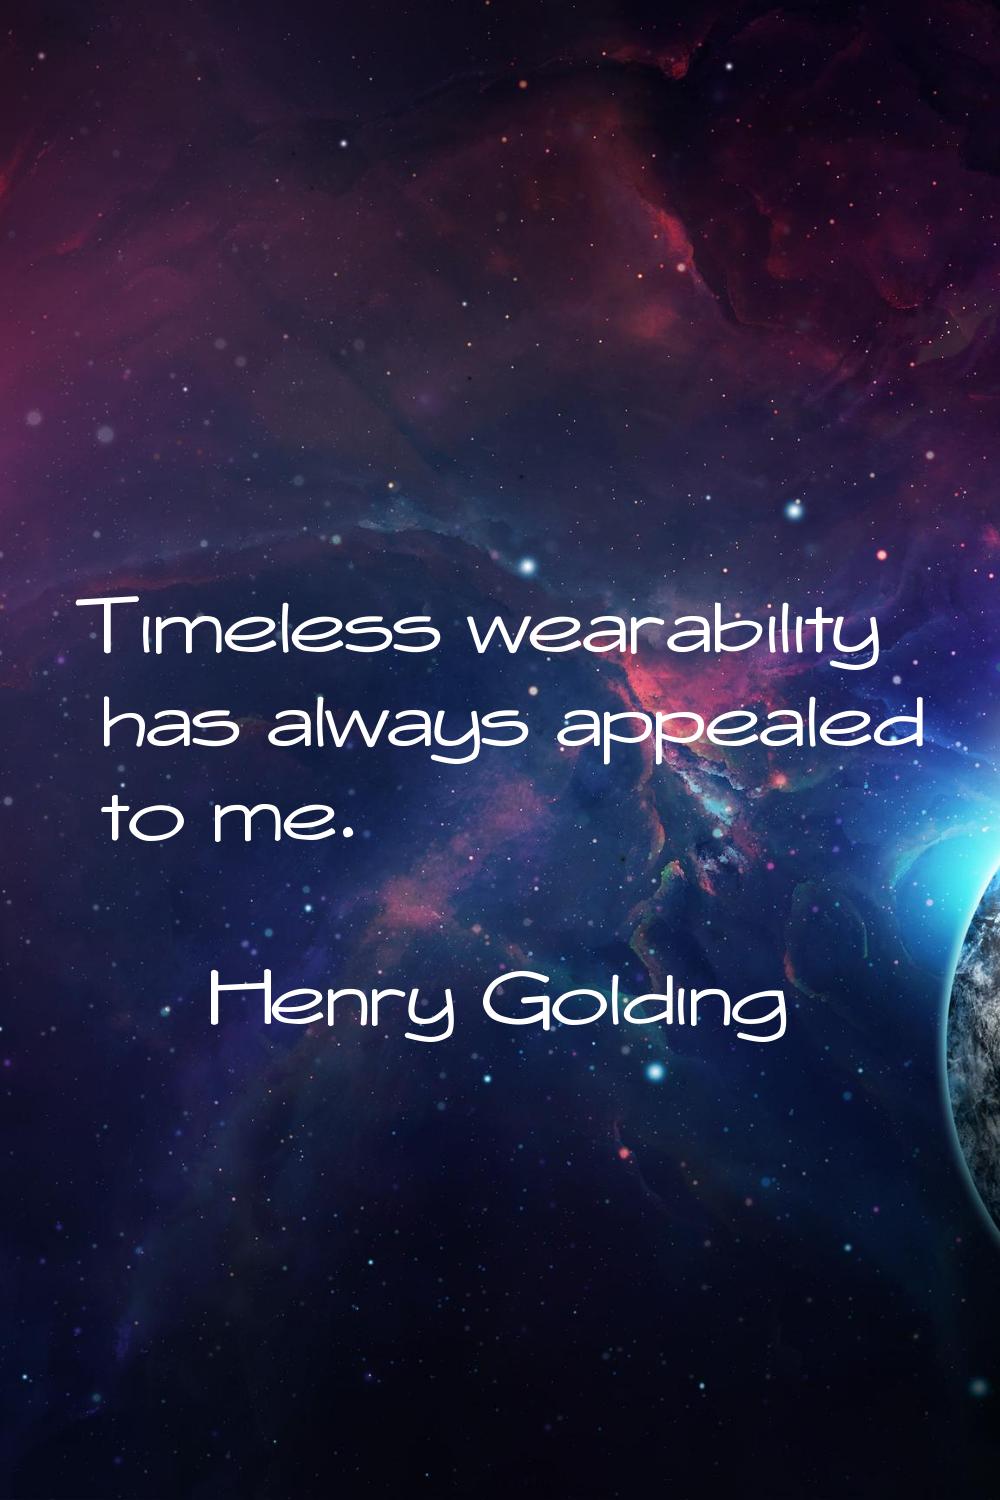 Timeless wearability has always appealed to me.